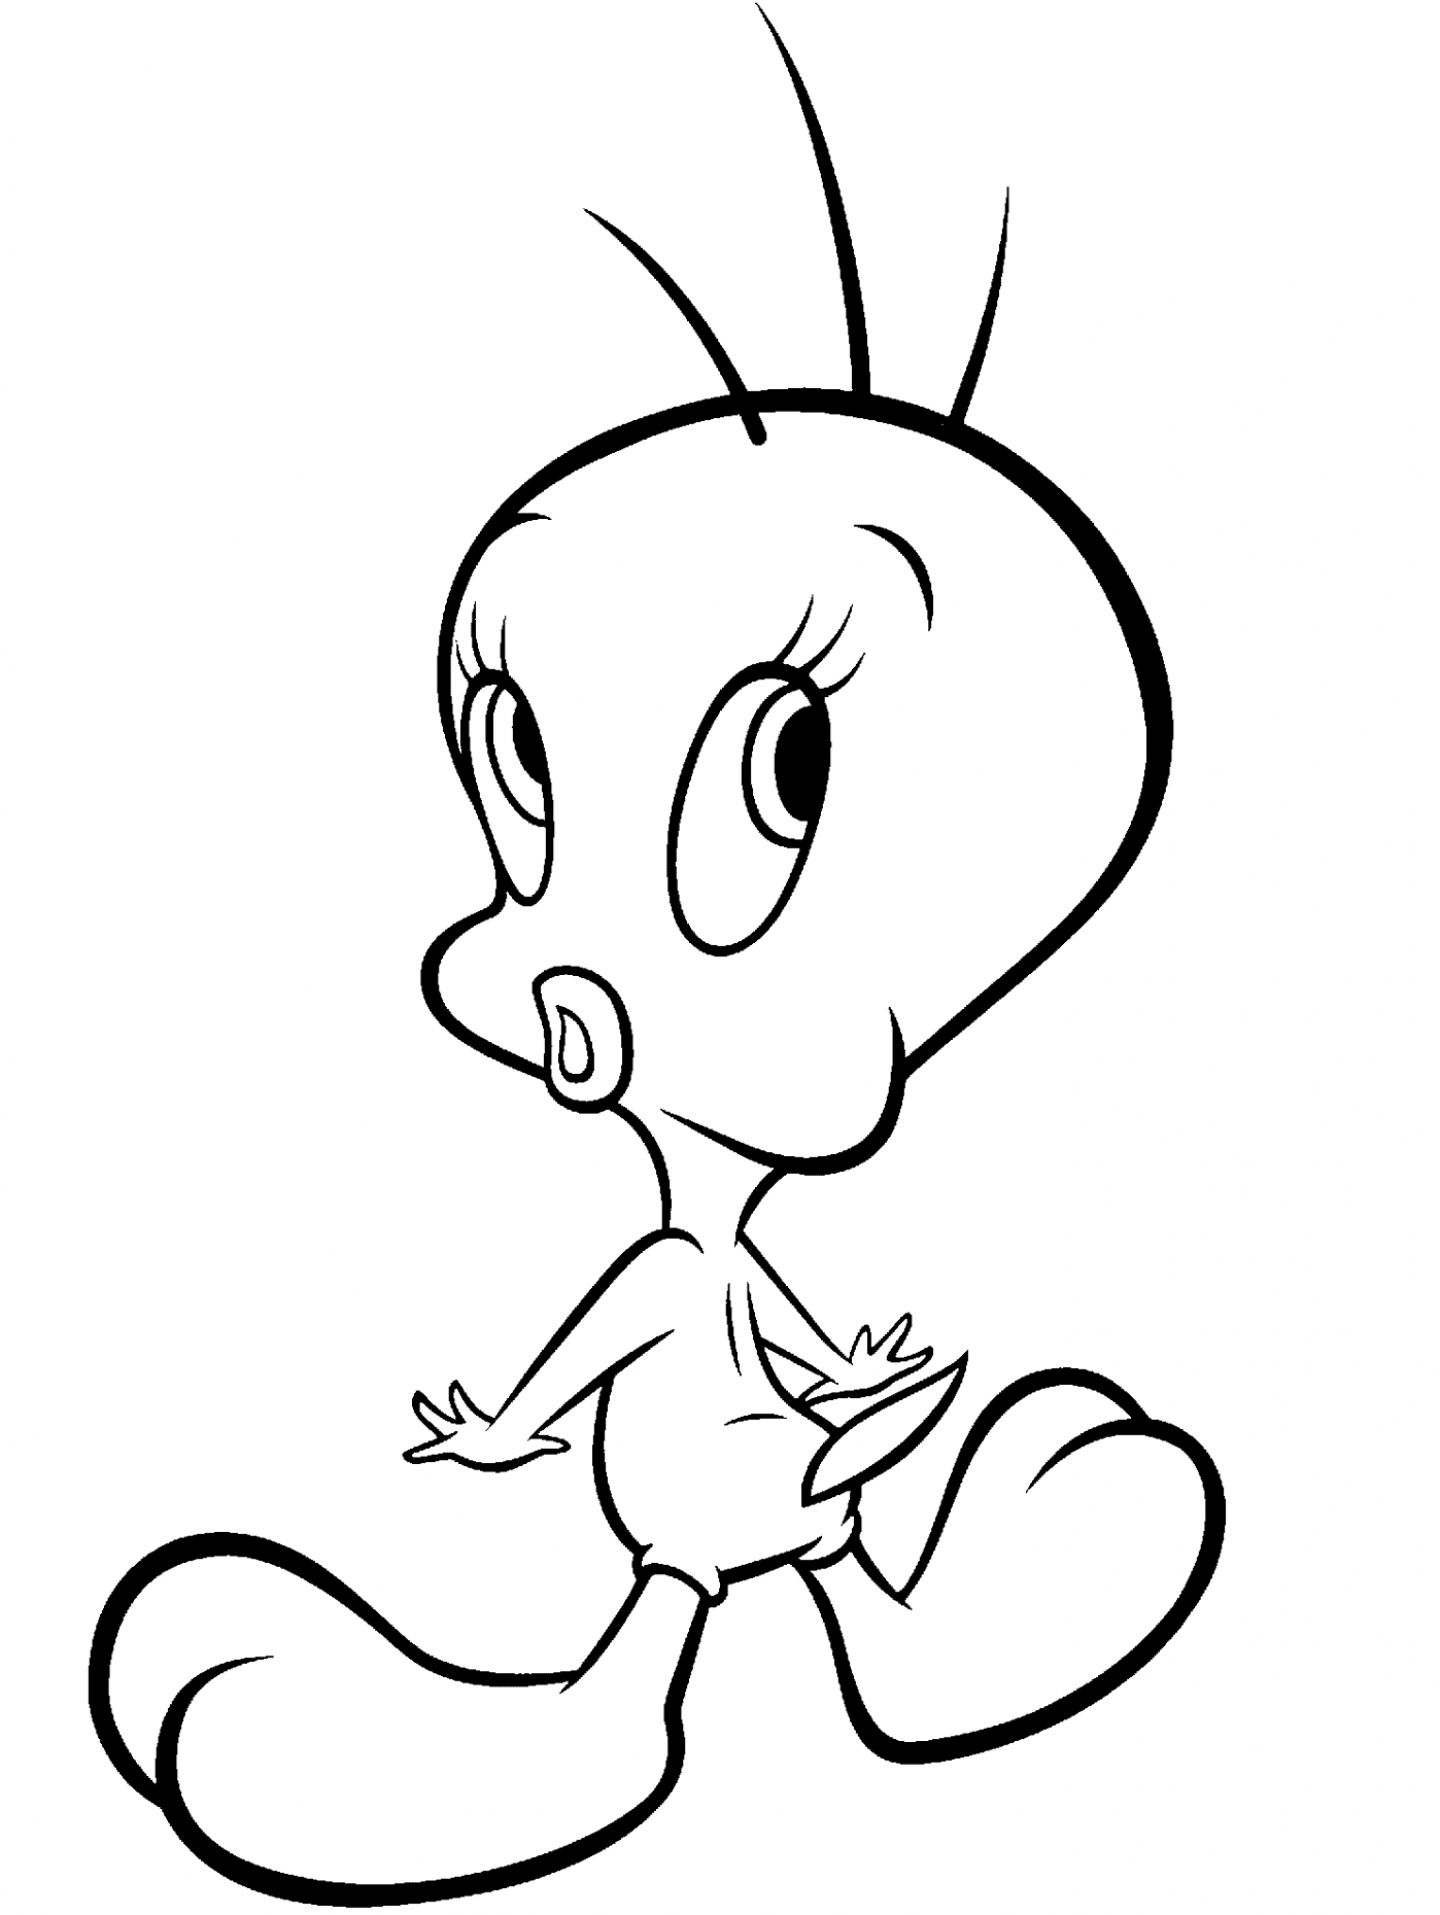 Tweety bird coloring pages ginormasource kids clipart